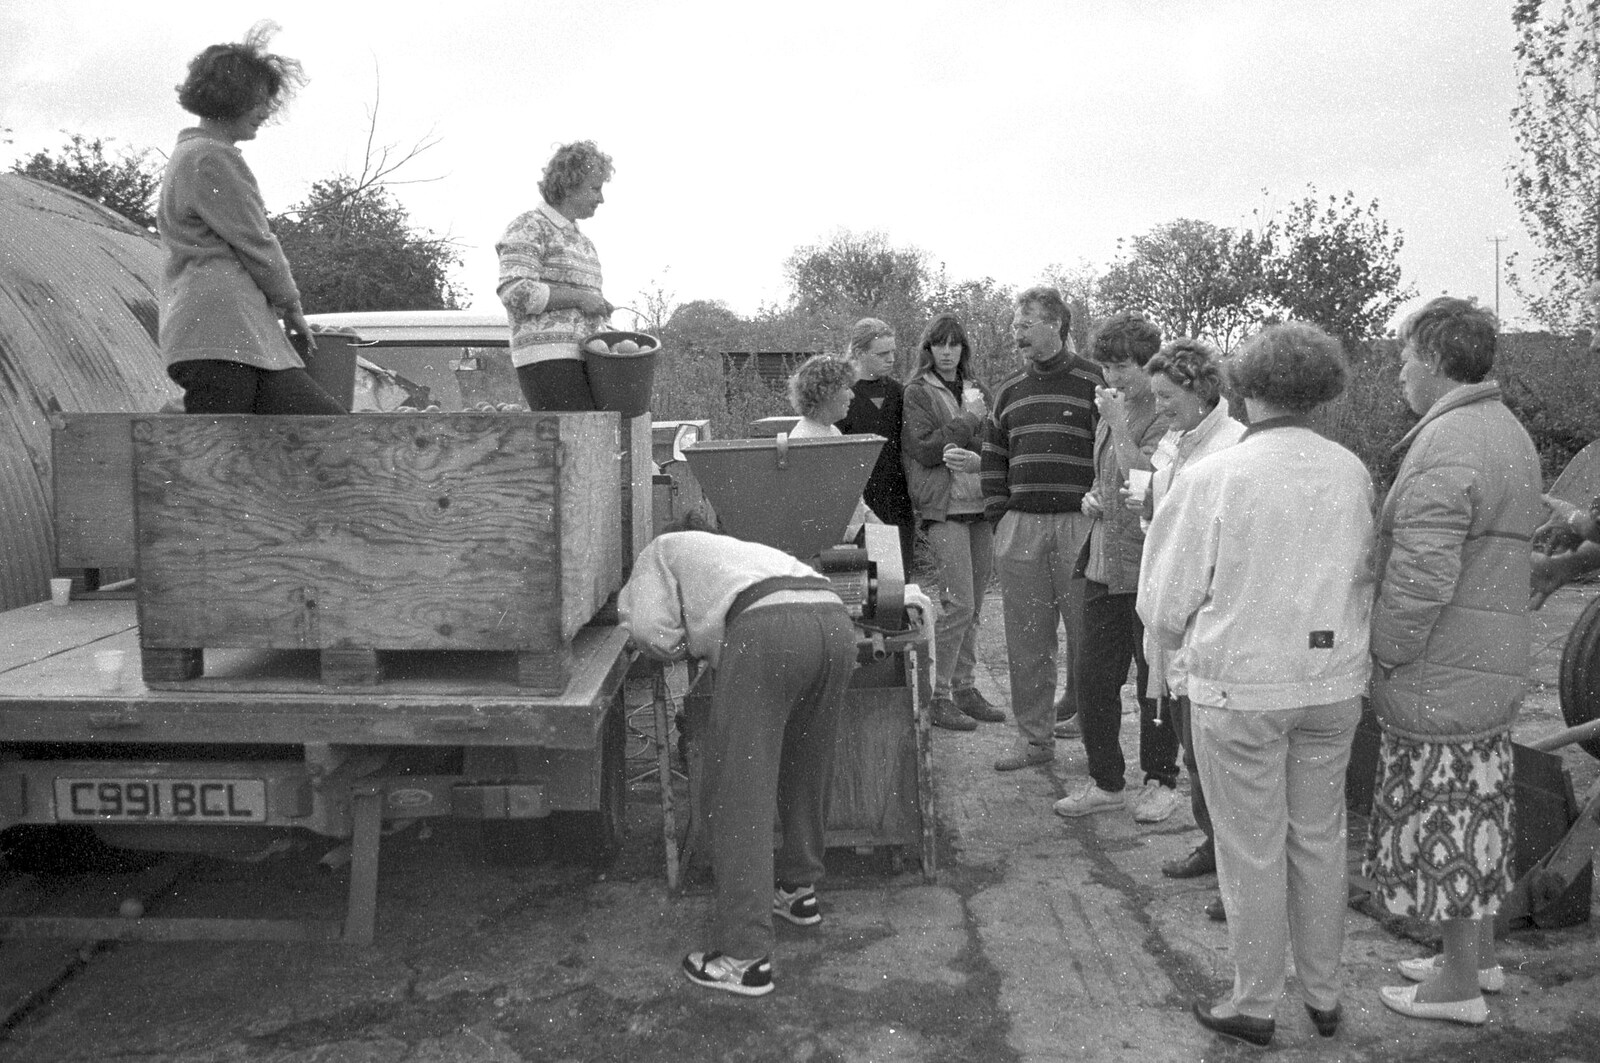 The cider gang gather around from Cider Making in Black and White, Stuston, Suffolk - 11th October 1992